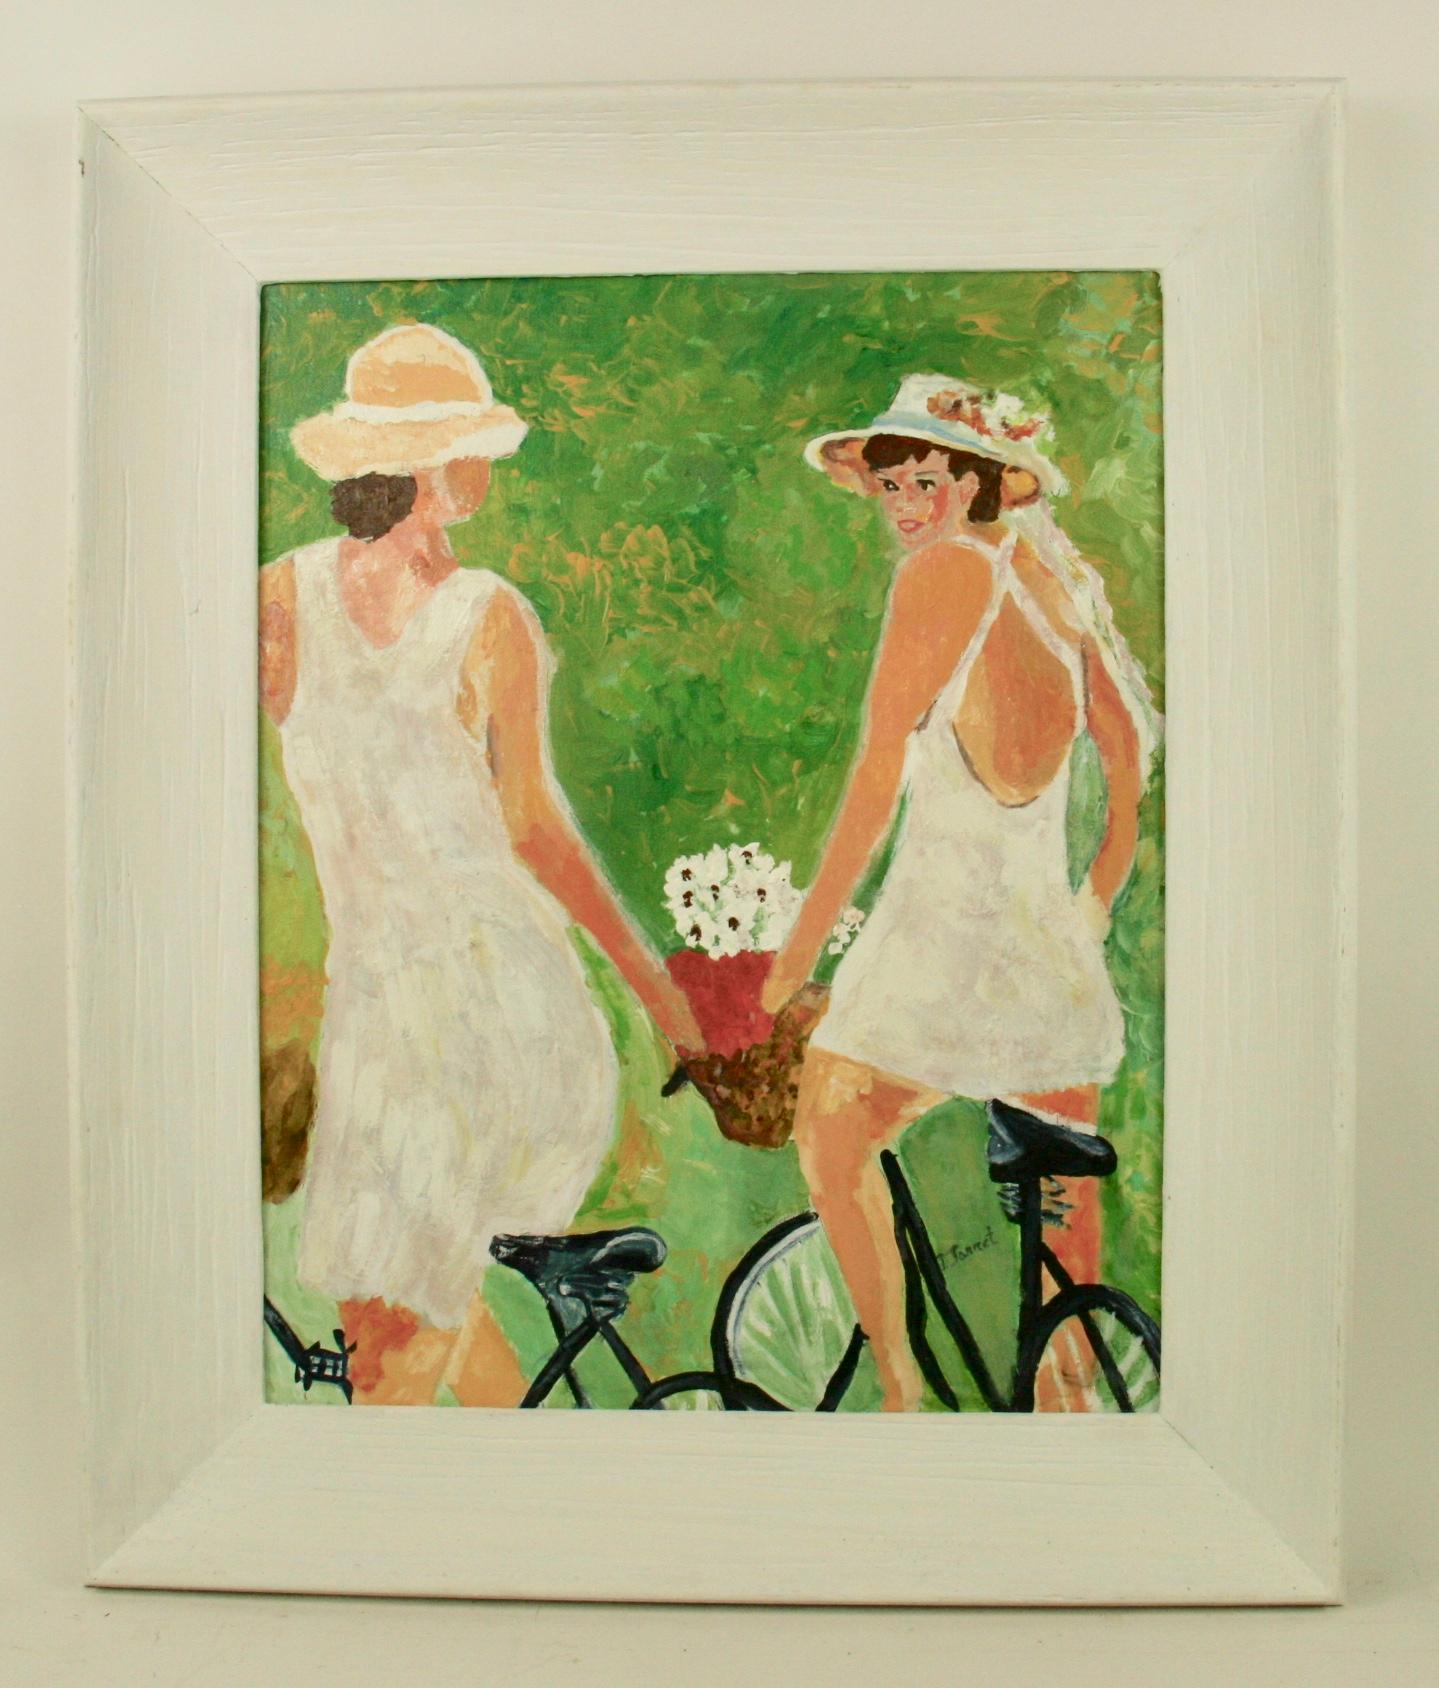 #5-3026 Friendship,a figurative acrylic on canvas applied to a wood board, displayed in a hand painted white wood frame, signed by I.Jarret.Image size 19.5 H x 15.5 W